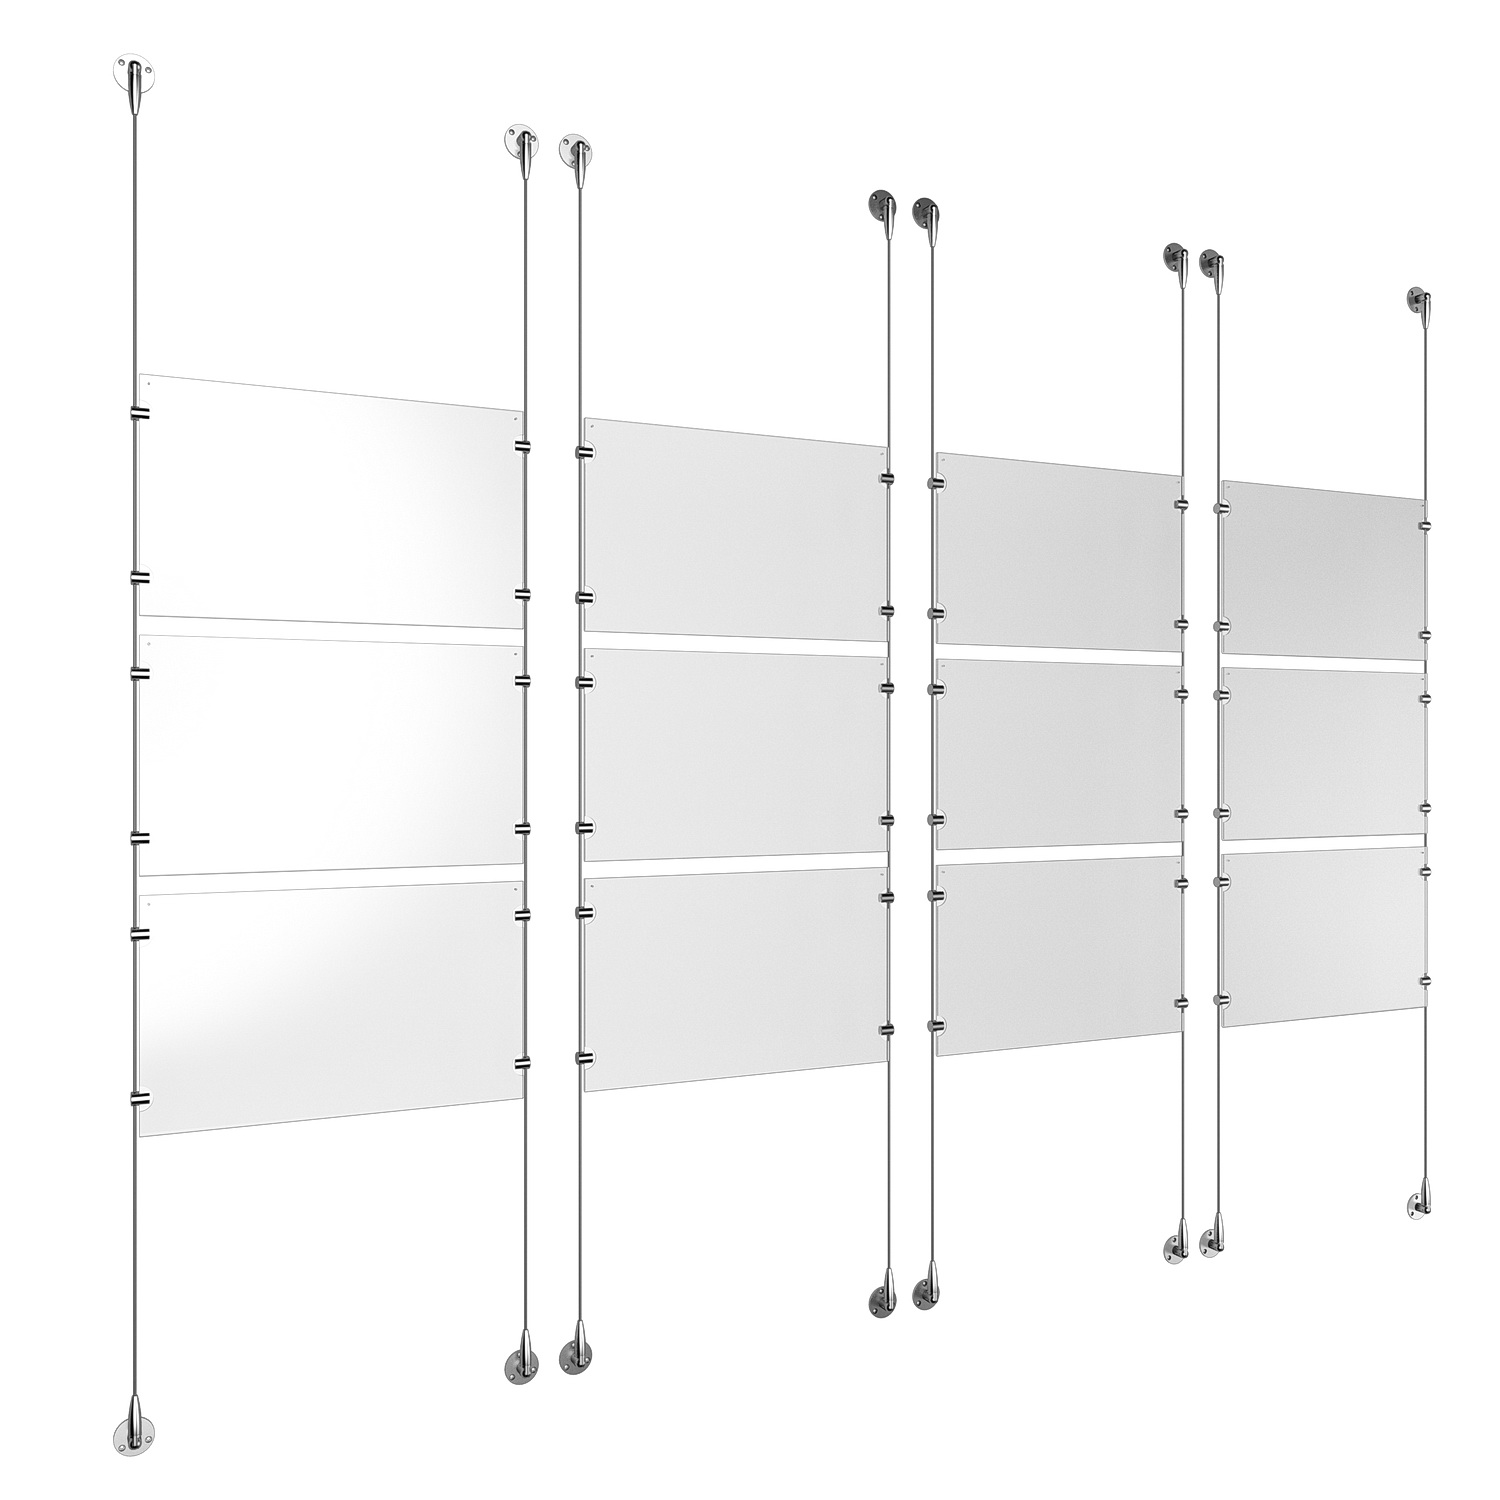 (12) 17'' Width x 11'' Height Clear Acrylic Frame & (8) Stainless Steel Satin Brushed Adjustable Angle Signature 1/8'' Cable Systems with (48) Single-Sided Panel Grippers